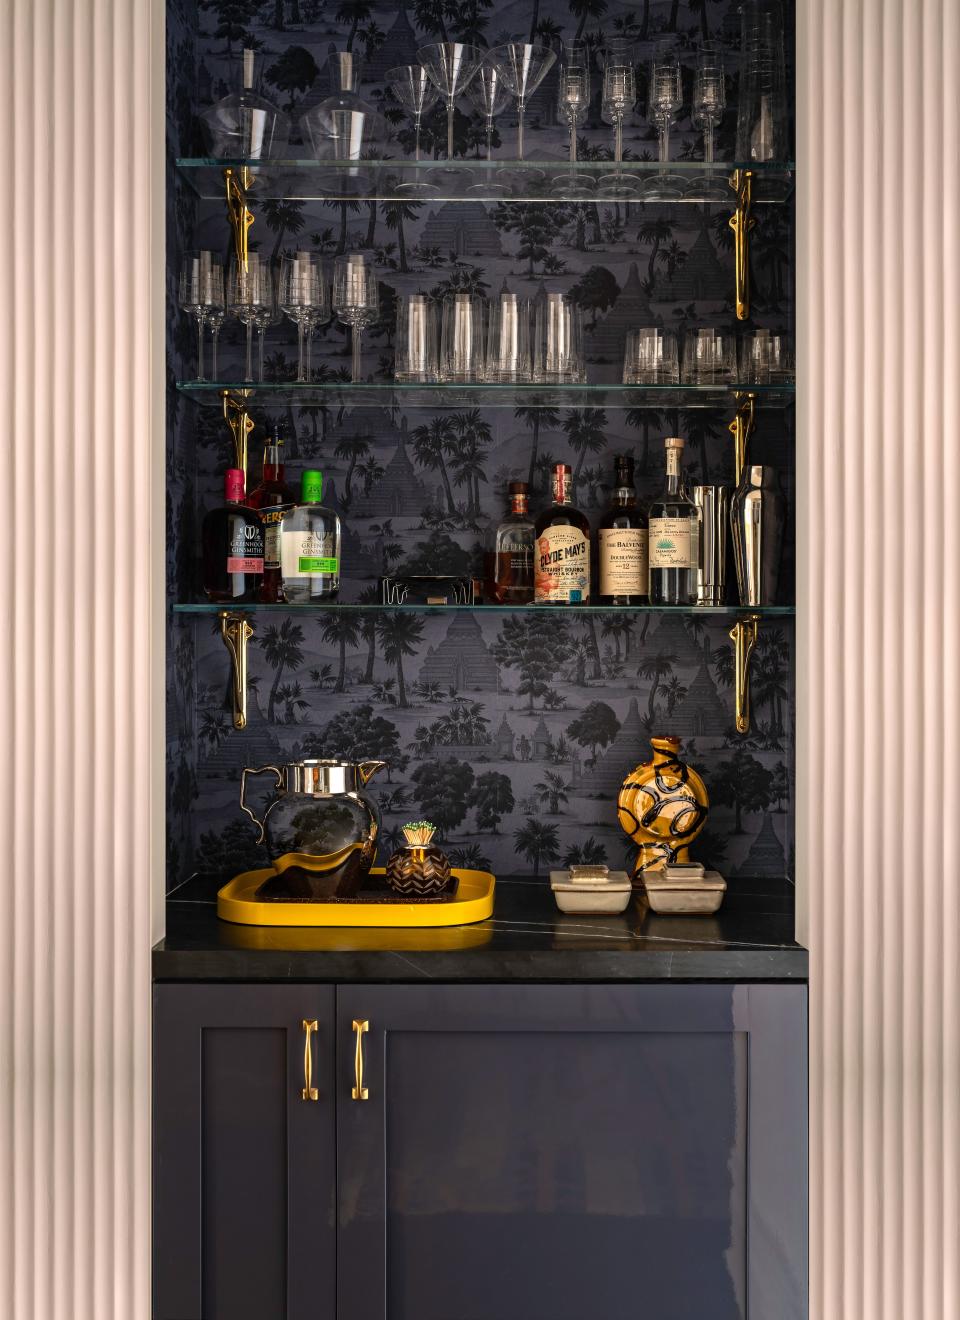 “This [home] is about you and your friends. What’s the first thing you do? You hang up their coat and you offer them a cocktail,” says Rockwell, who turned a closet in the foyer into a bar lined in Pierre Frey wallpaper and outfitted with a wine fridge, cocktail shakers, and Christofle glassware. “That’s New York City—a martini when you walk in the door in this fab, glossy foyer where everything is like jewelry.”